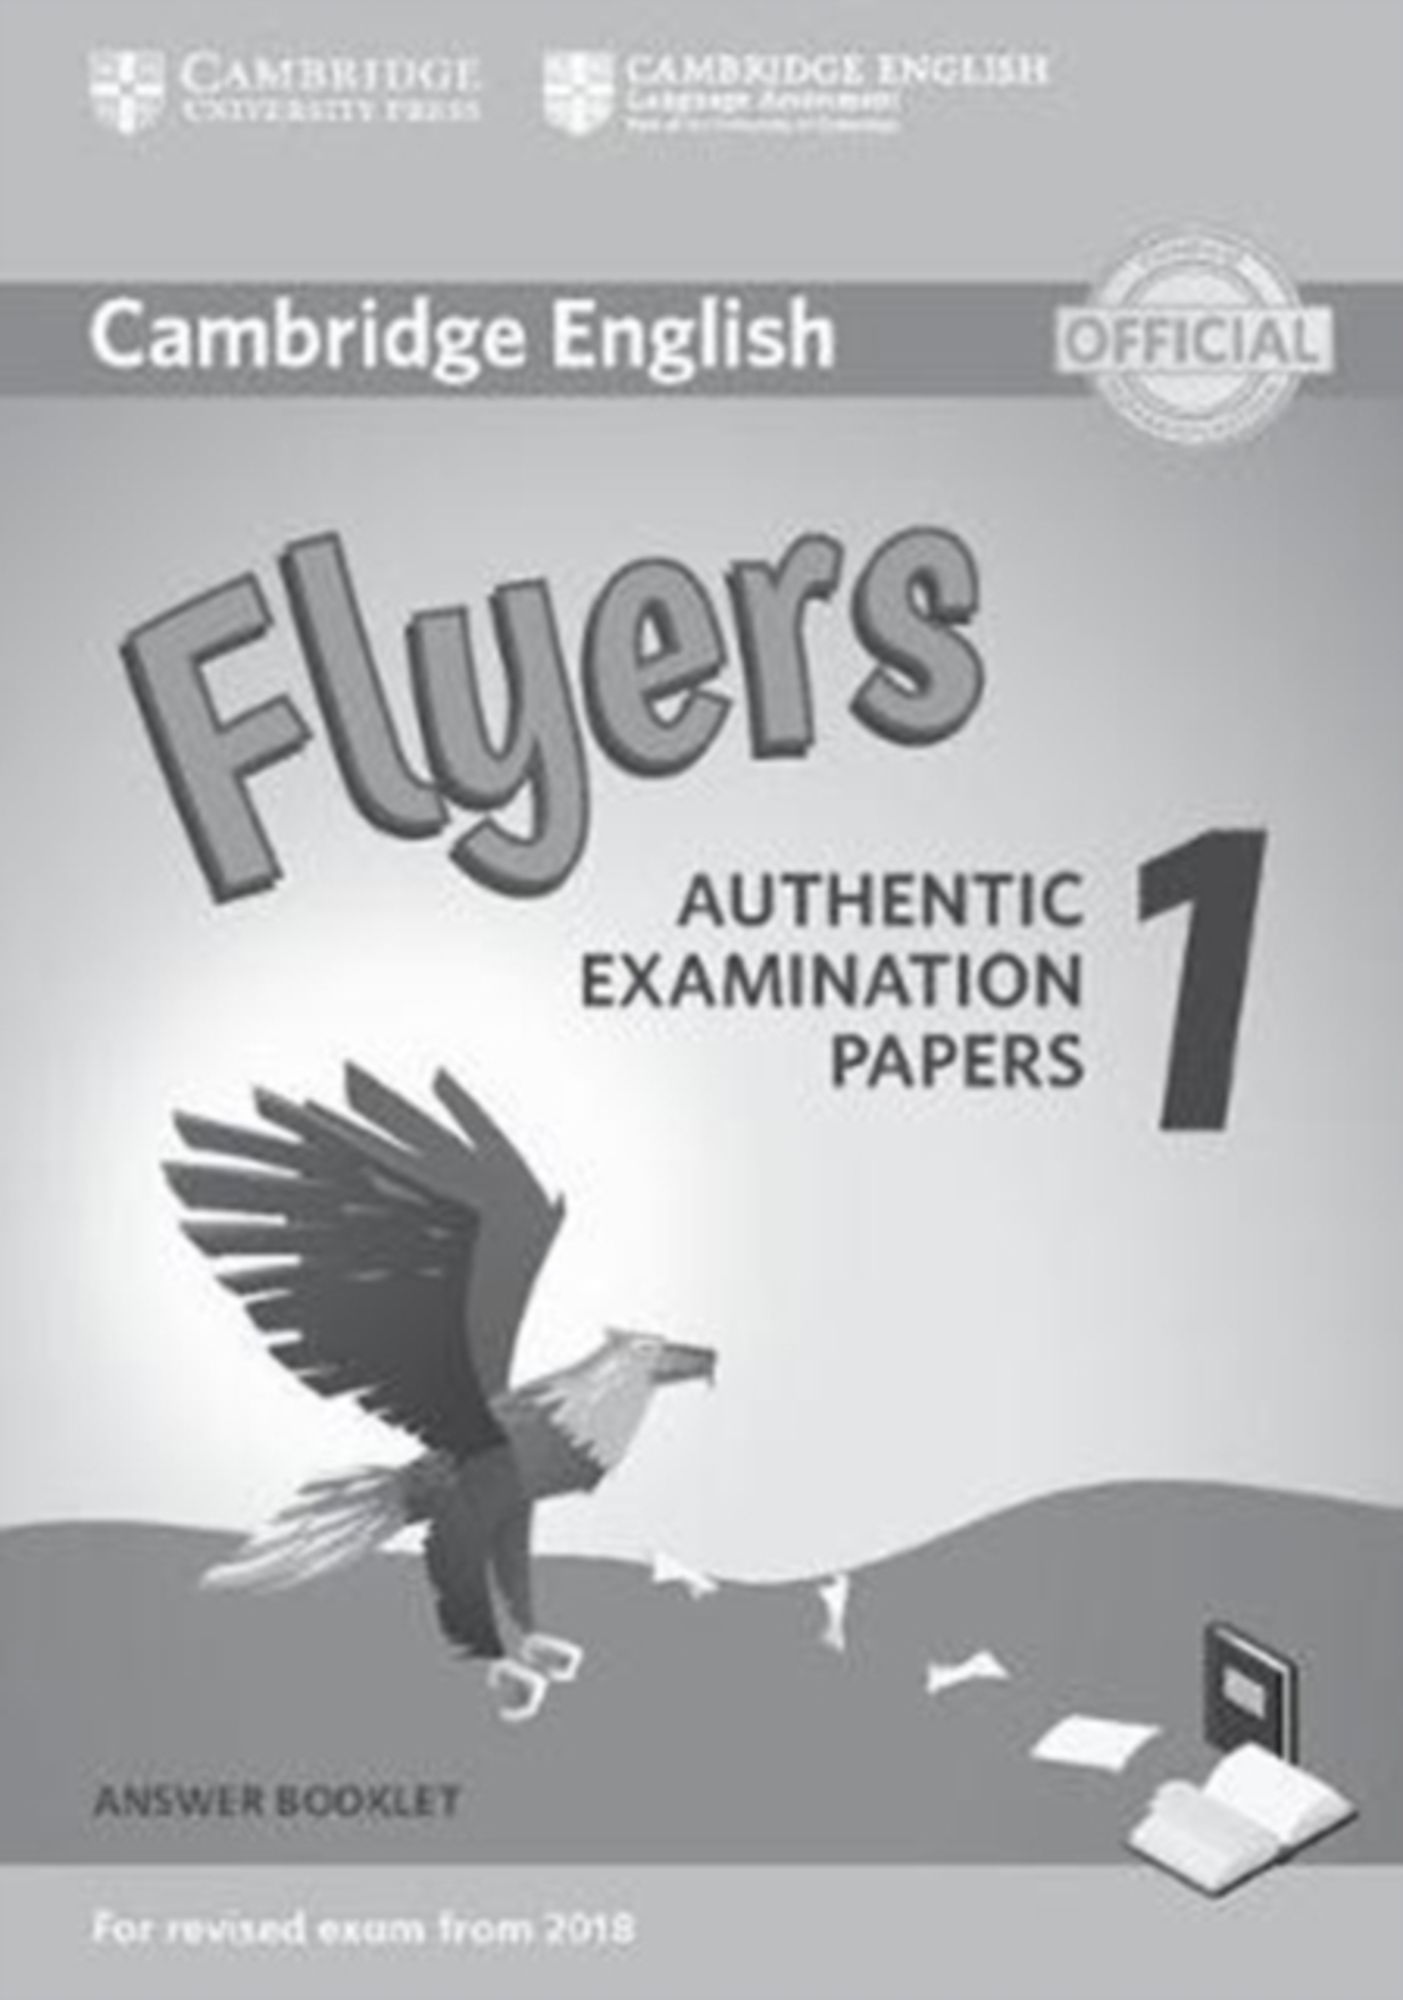 Cambridge　Papers'　Schulbuch　'Englisch'　Booklet:　2018　Answer　'978-1-316-63595-7'　English　Authentic　Revised　for　Flyers　Examination　Exam　from